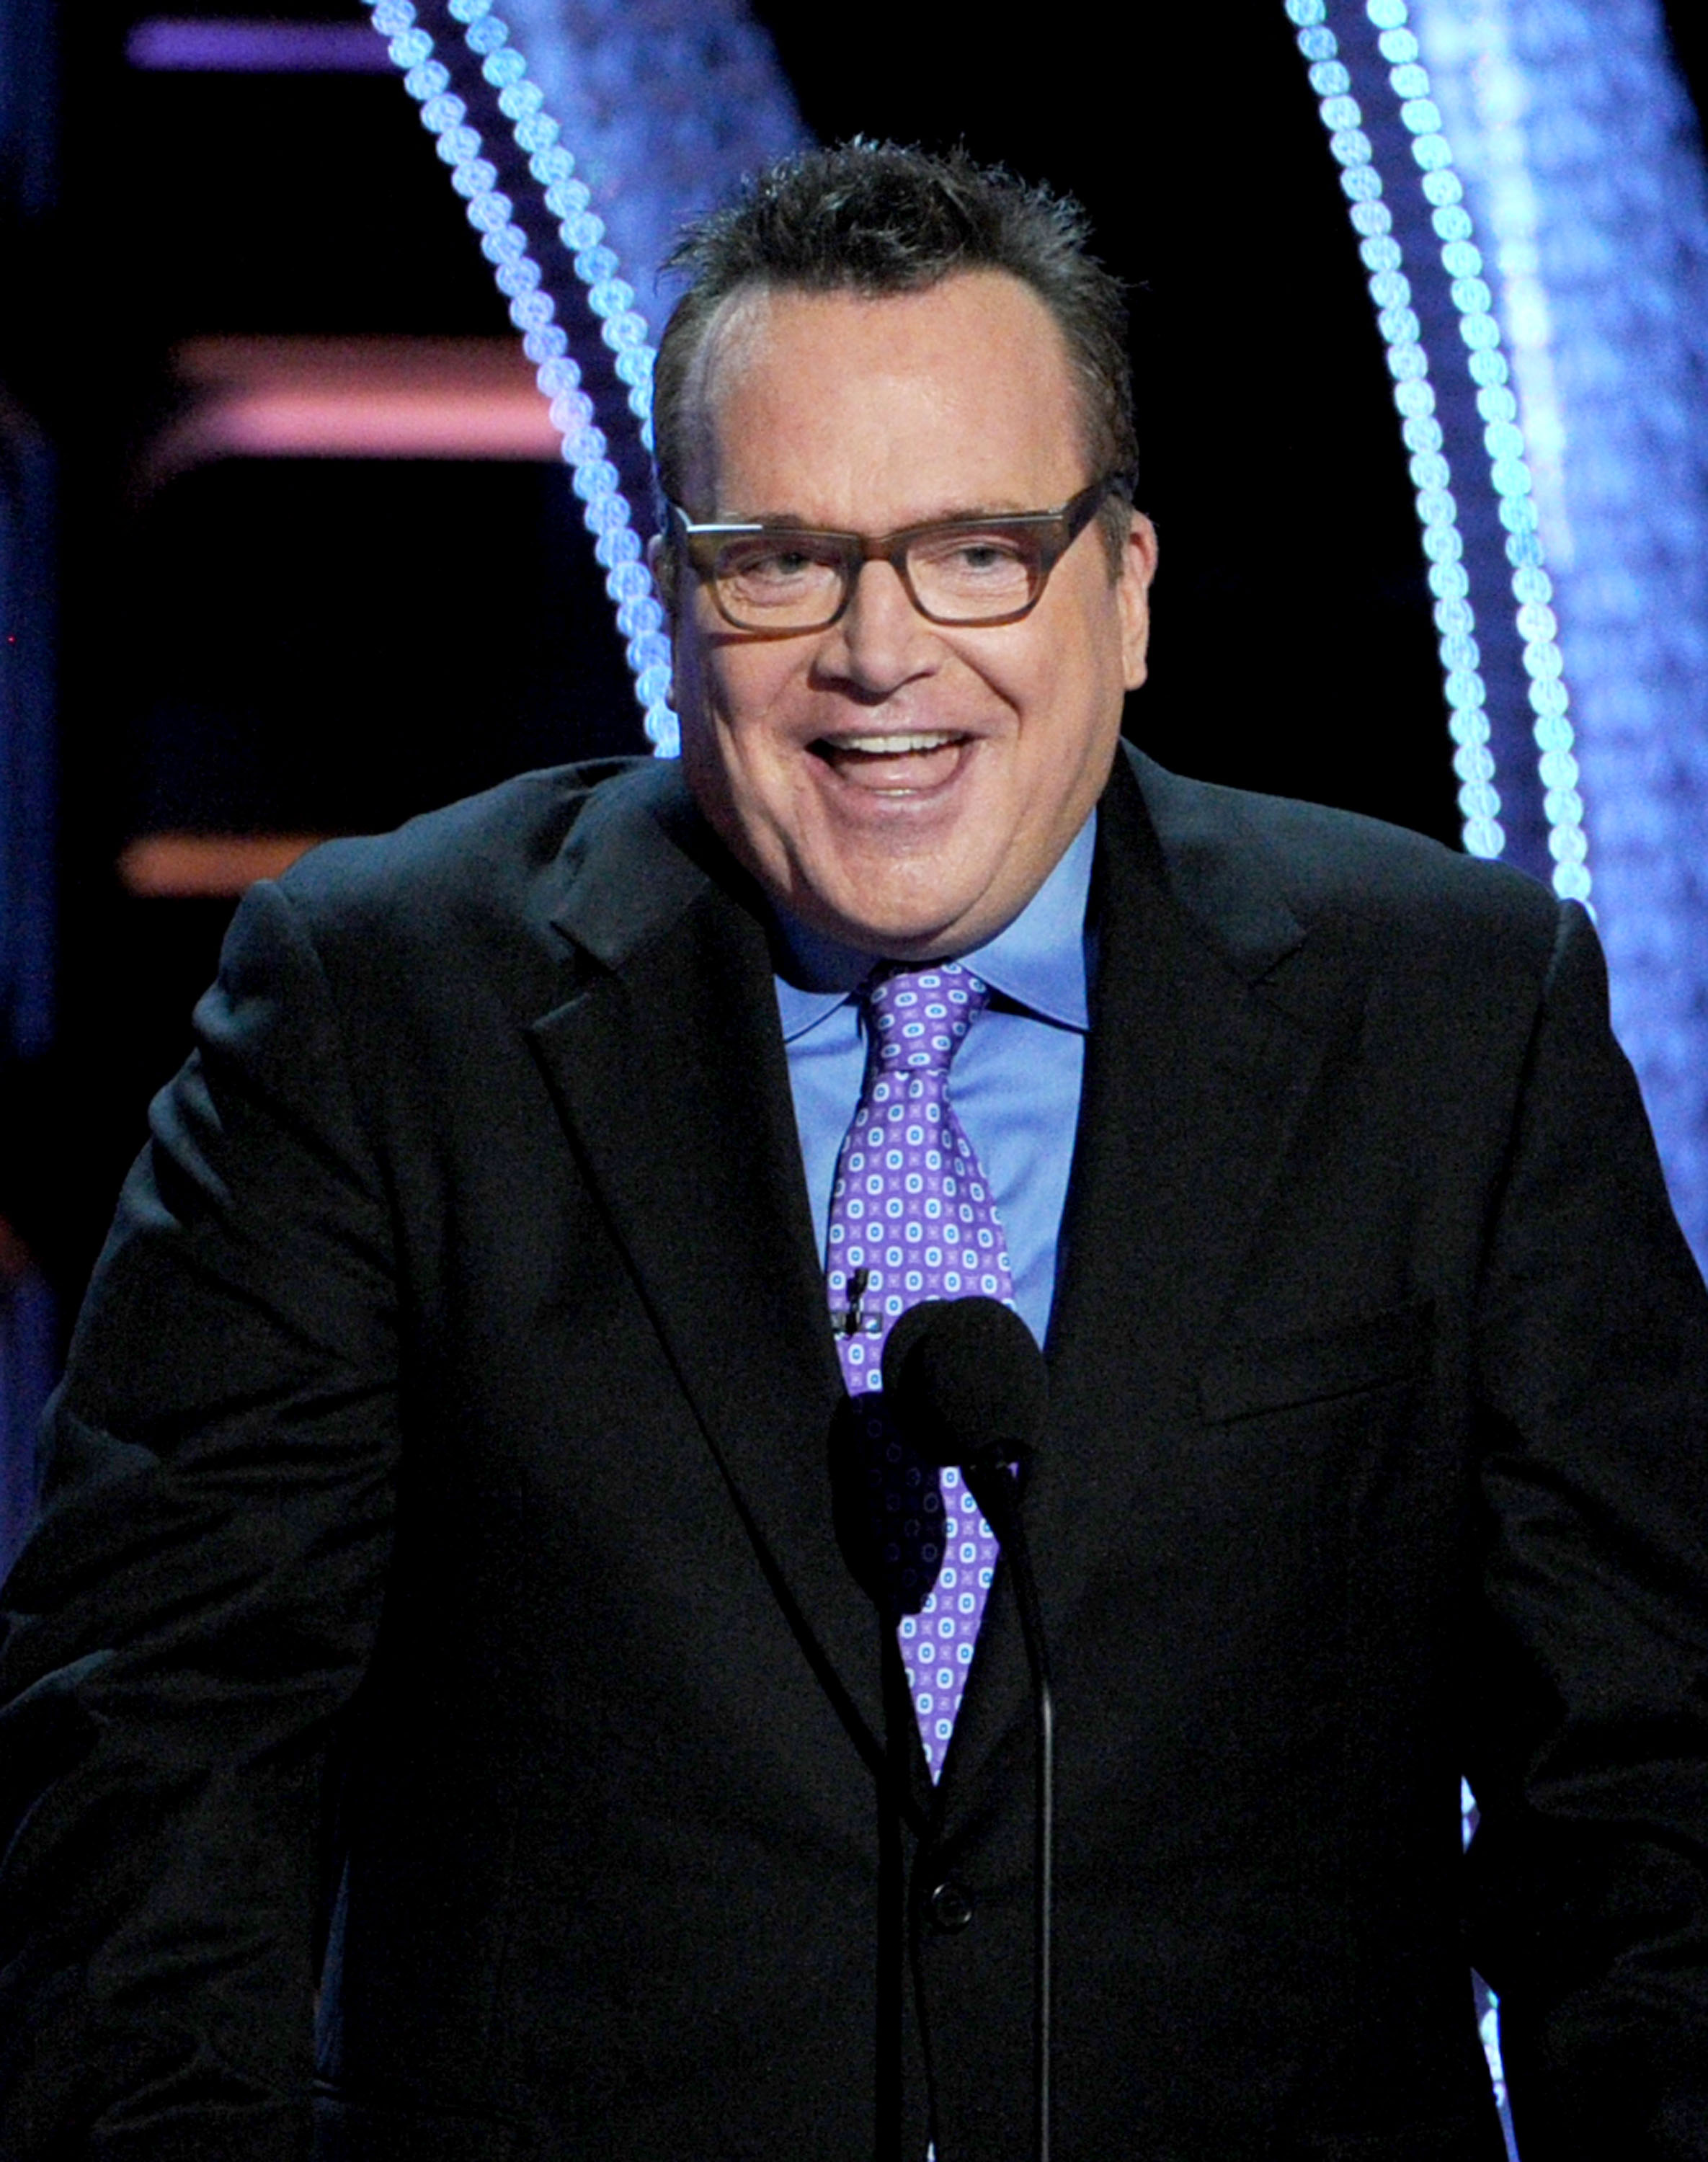 Actor Tom Arnold speaks onstage during the Comedy Central Roast of Roseanne Barr at Hollywood Palladium on August 4, 2012 in Hollywood, California. | Source: Getty Images